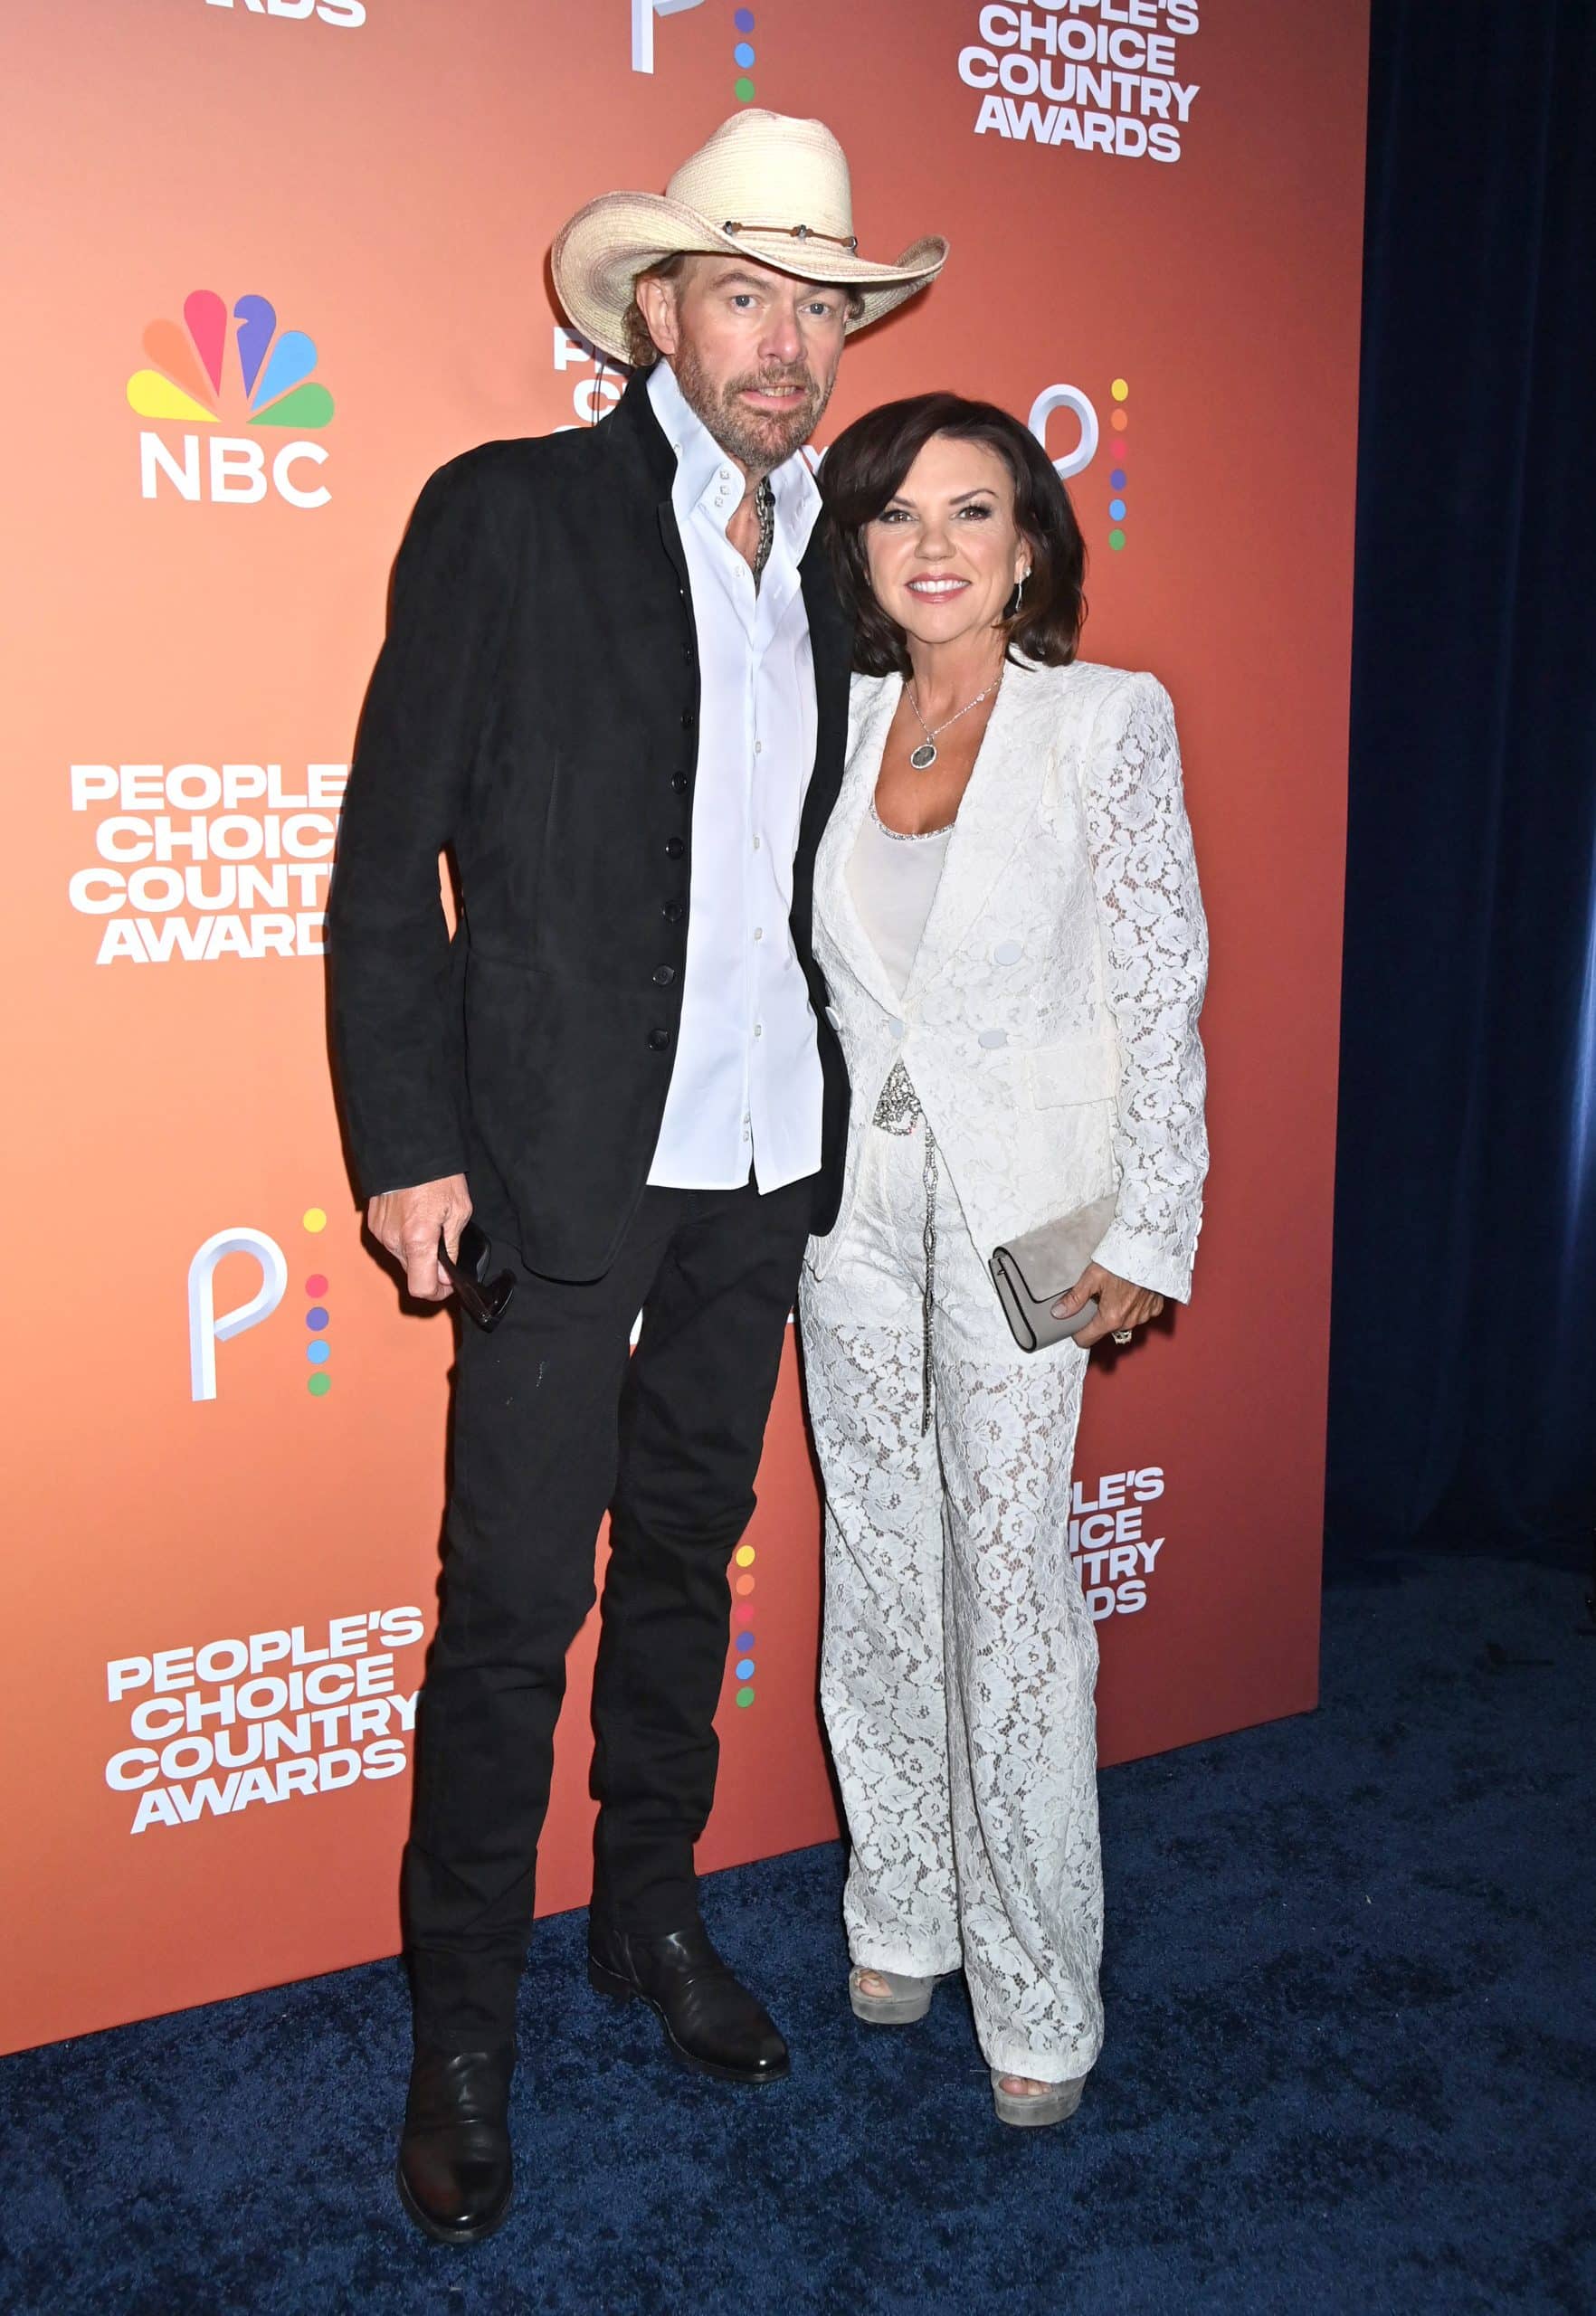 Toby Keith and his wife Tricia at the 2023 People's Choice Country Awards